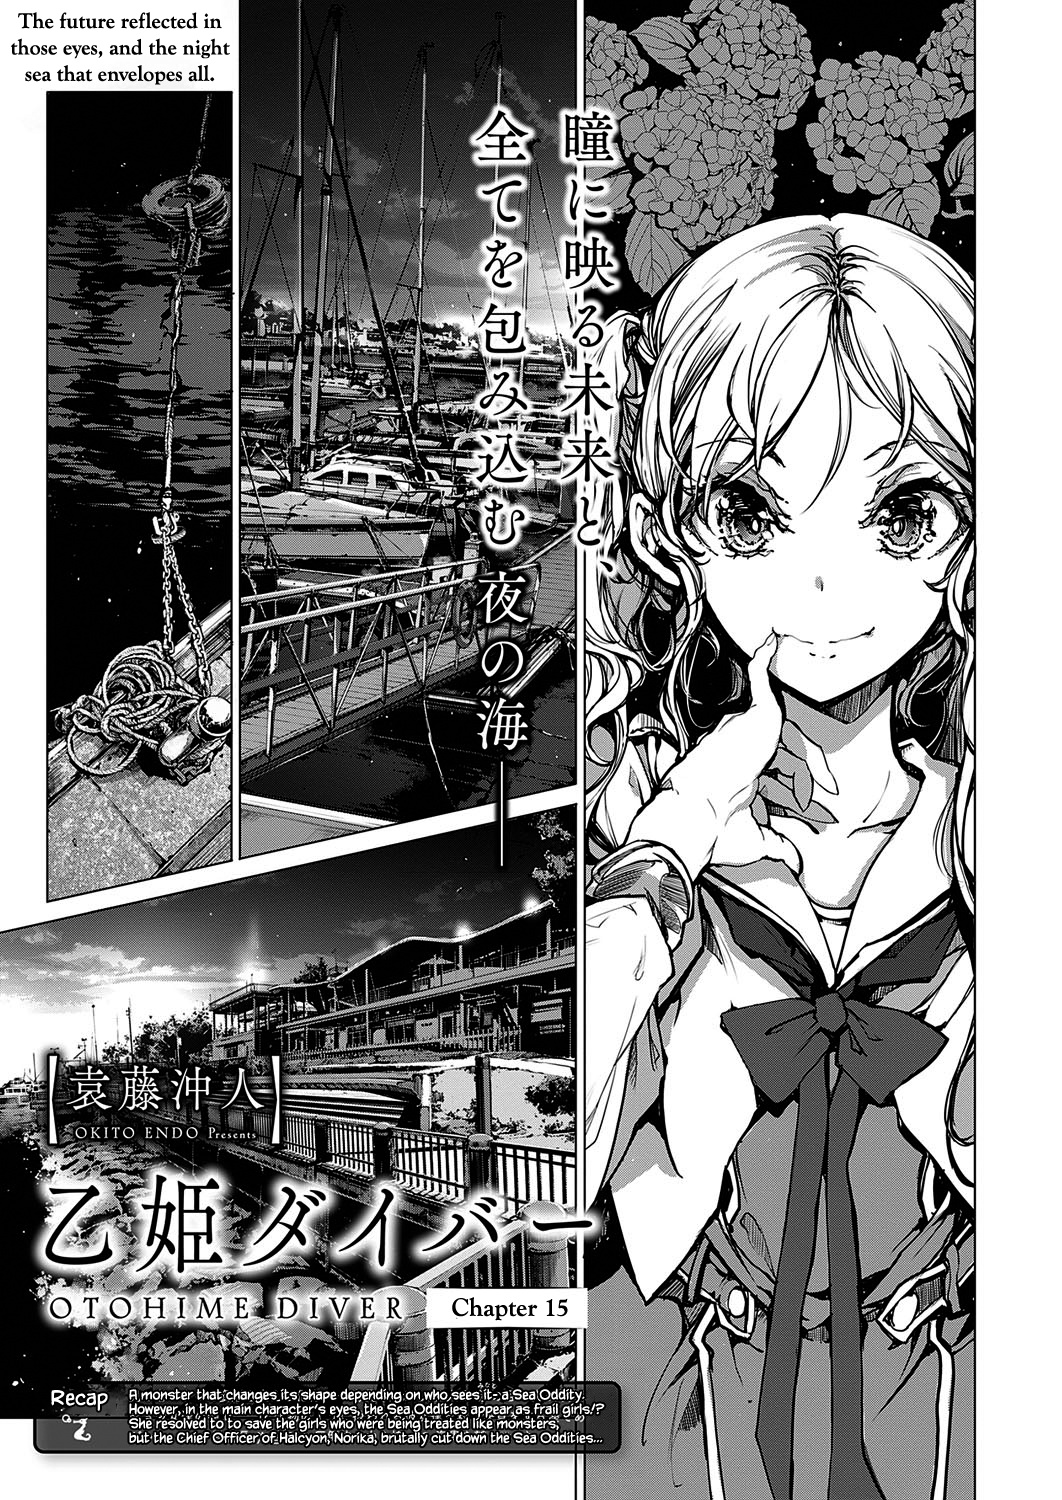 Otohime Diver Chapter 15 #1